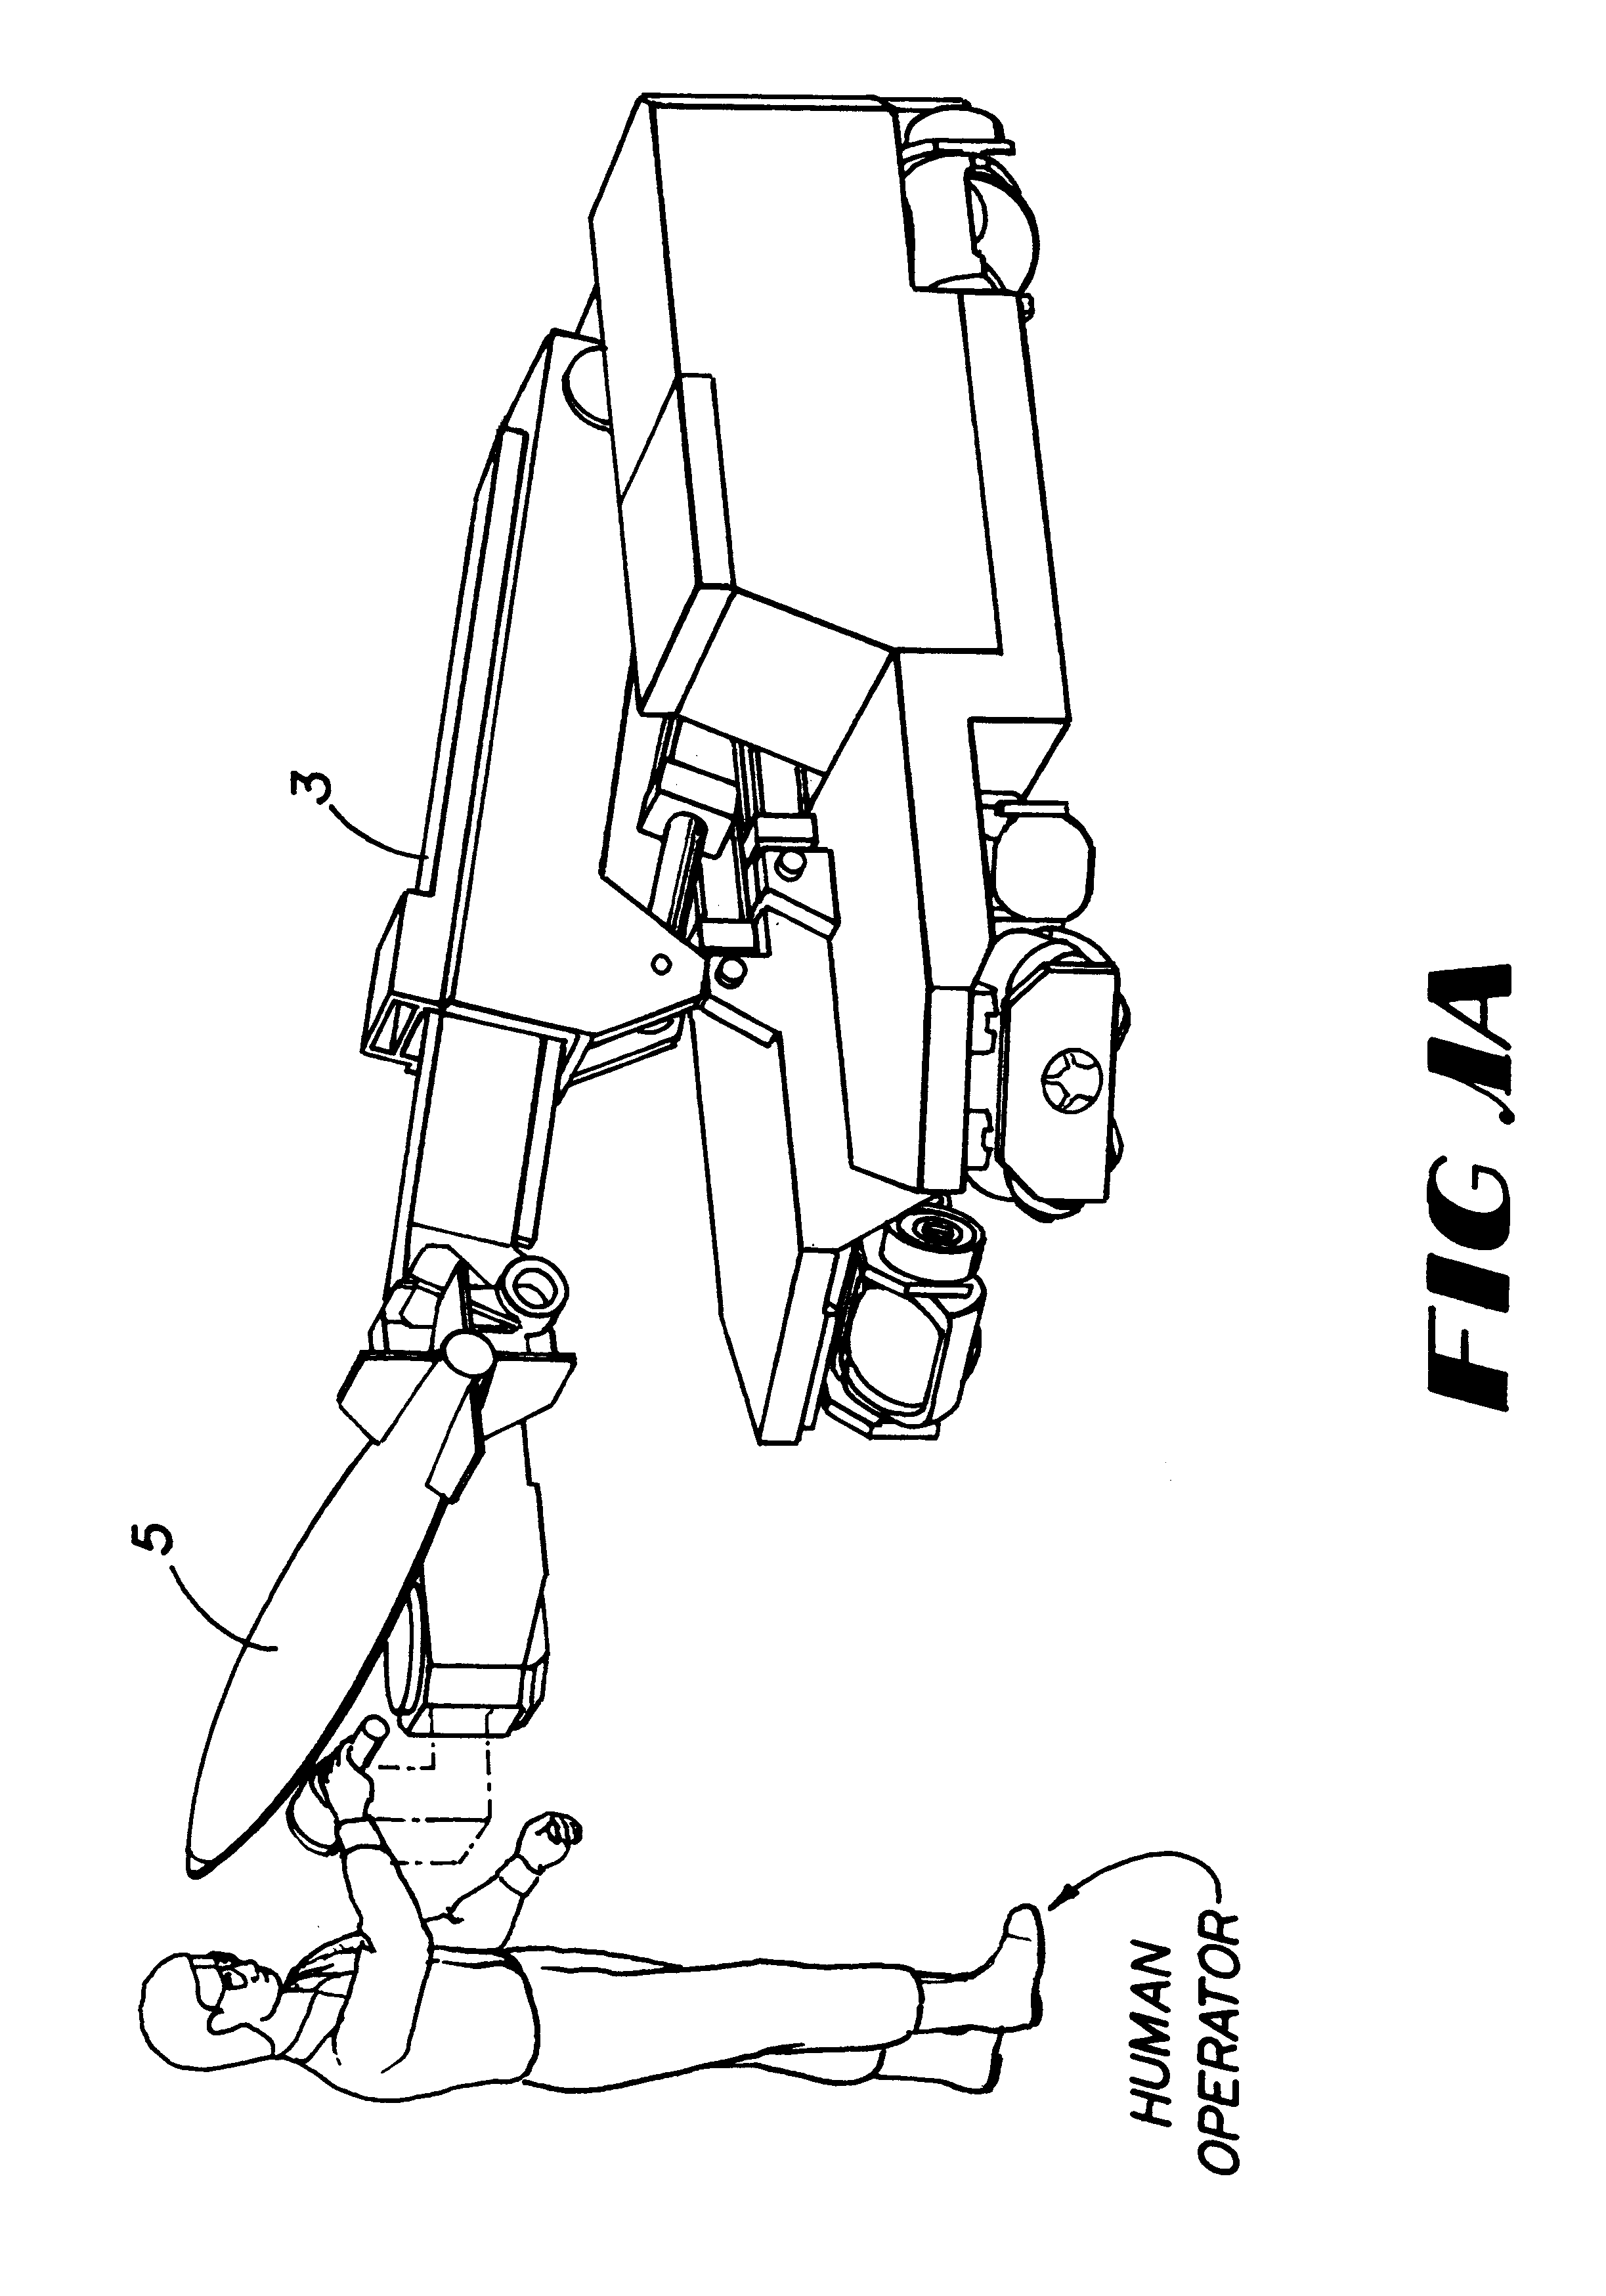 Apparatus and methods for a human extender